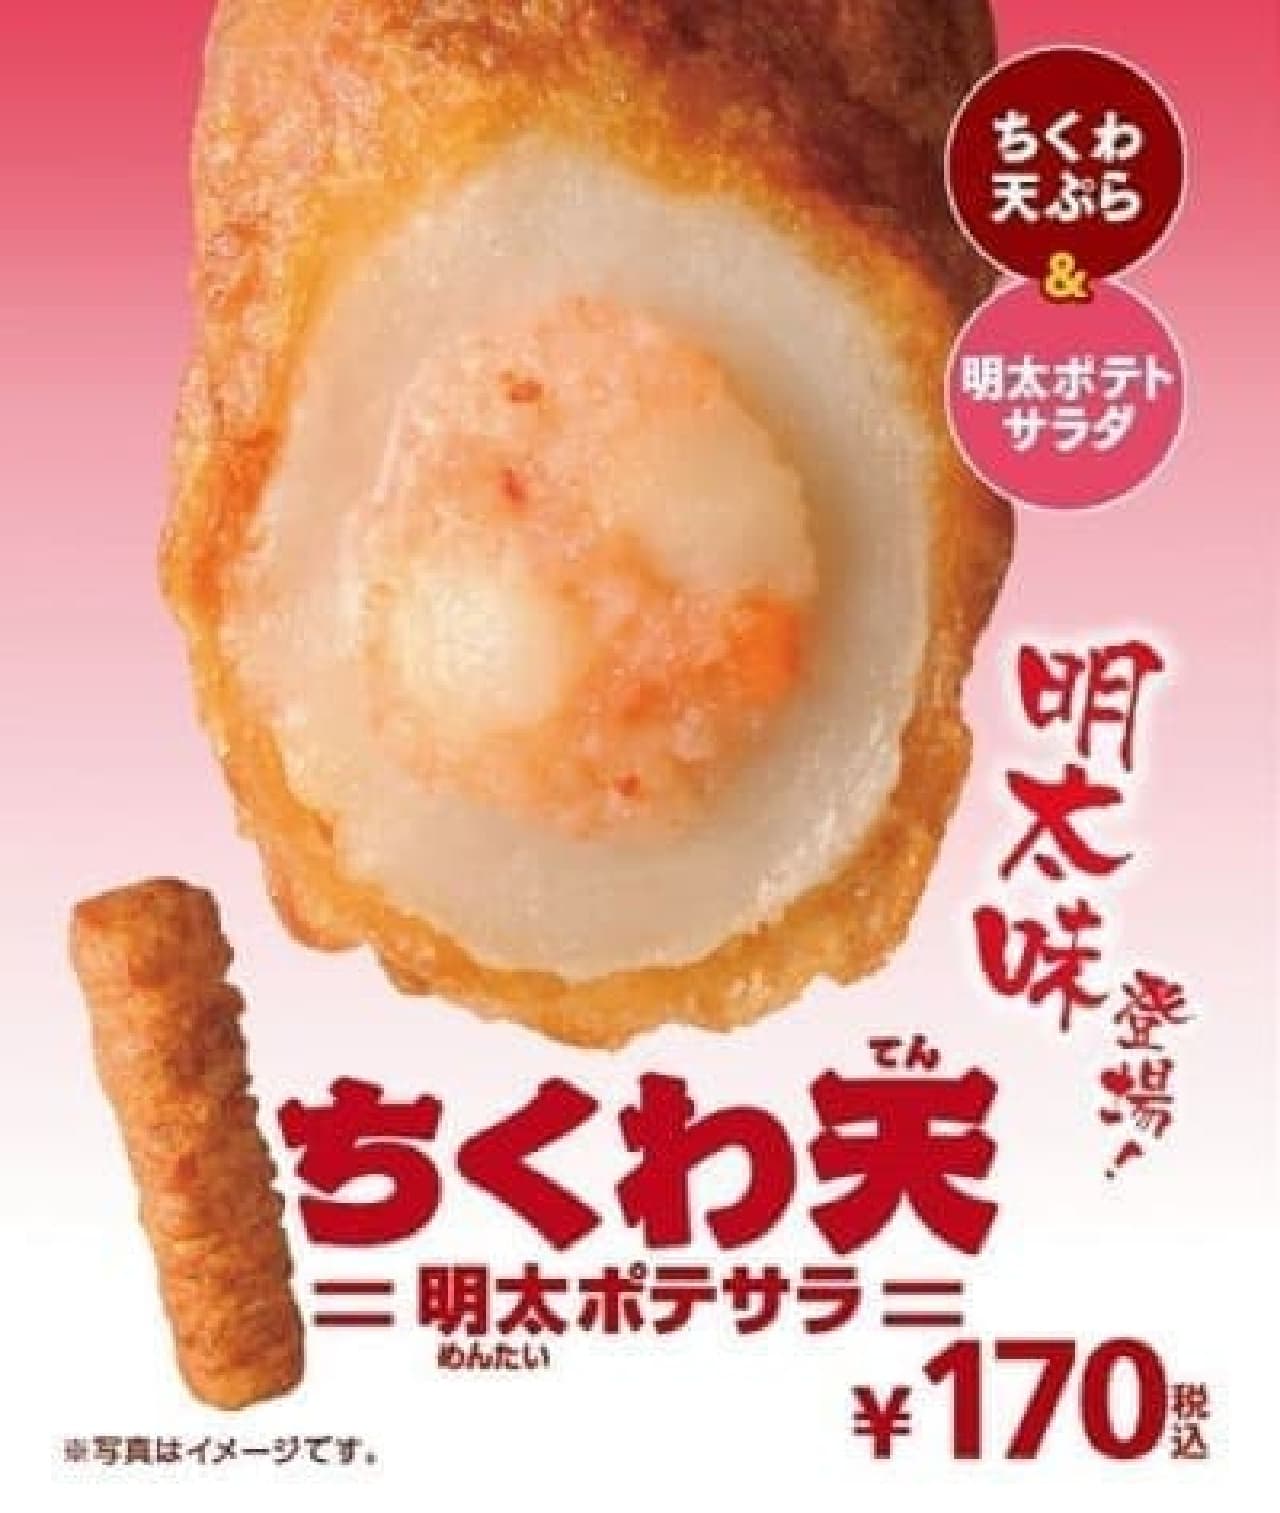 How about the crispy and fluffy "chikuwa heaven"?